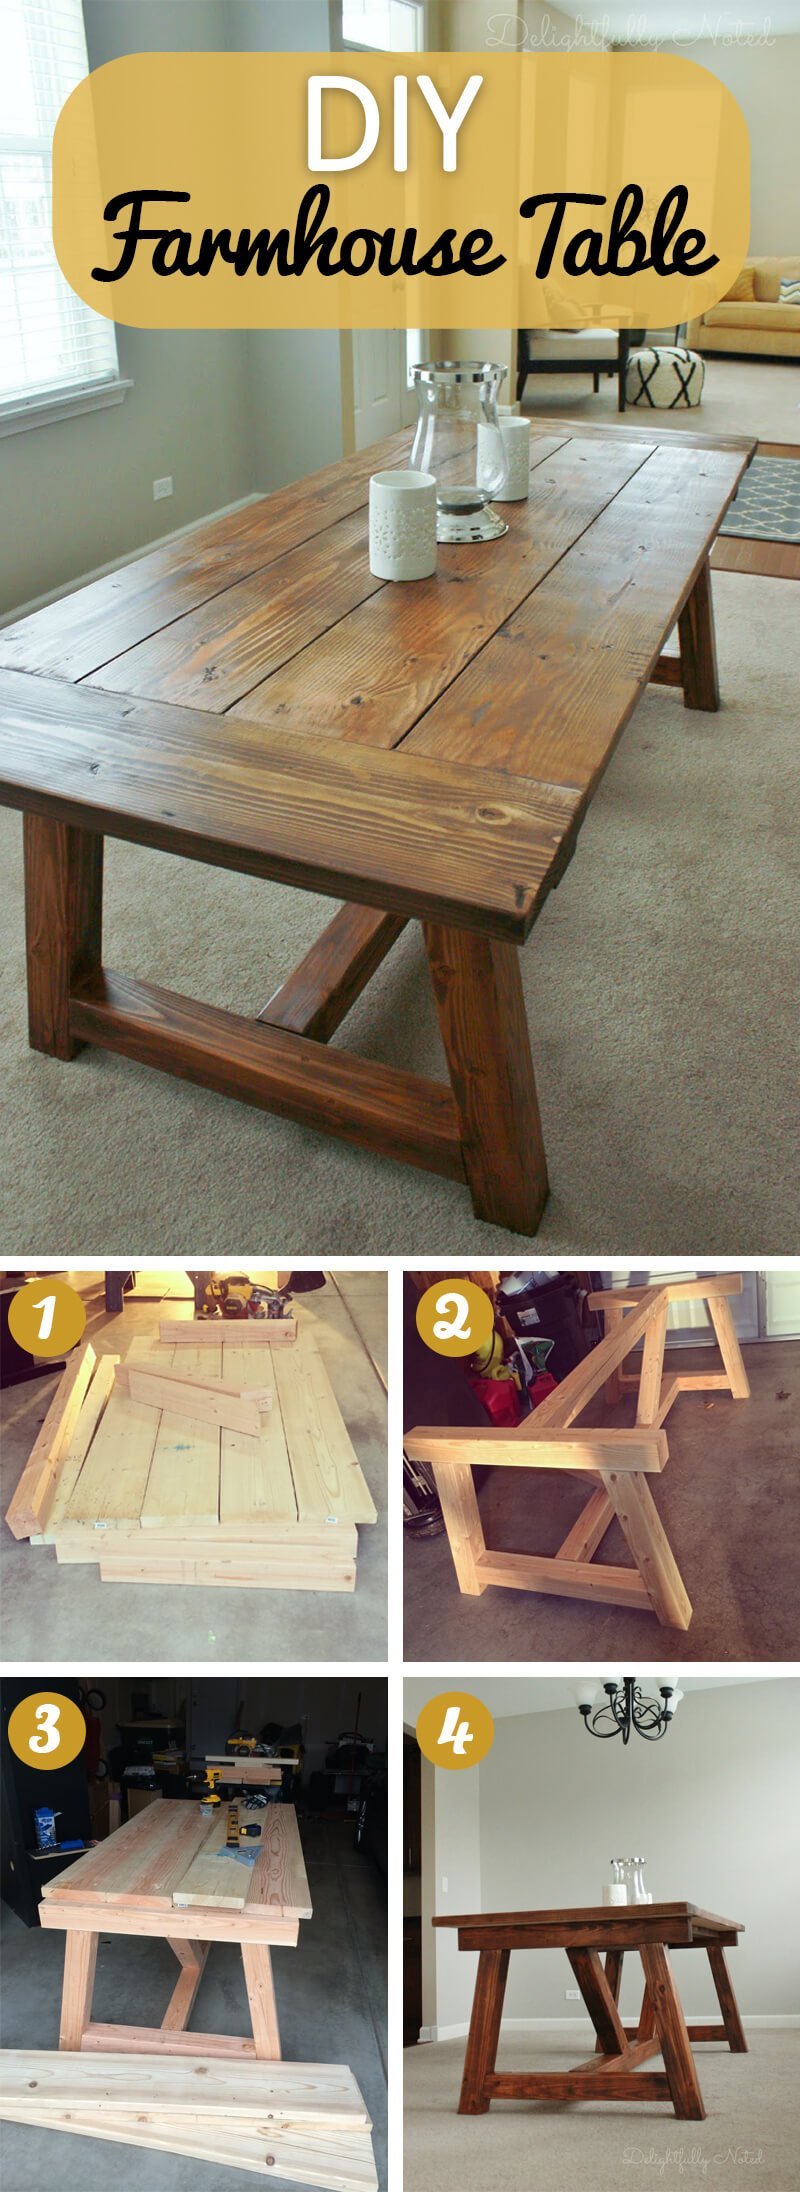 Build the Designer Table You Can't Afford